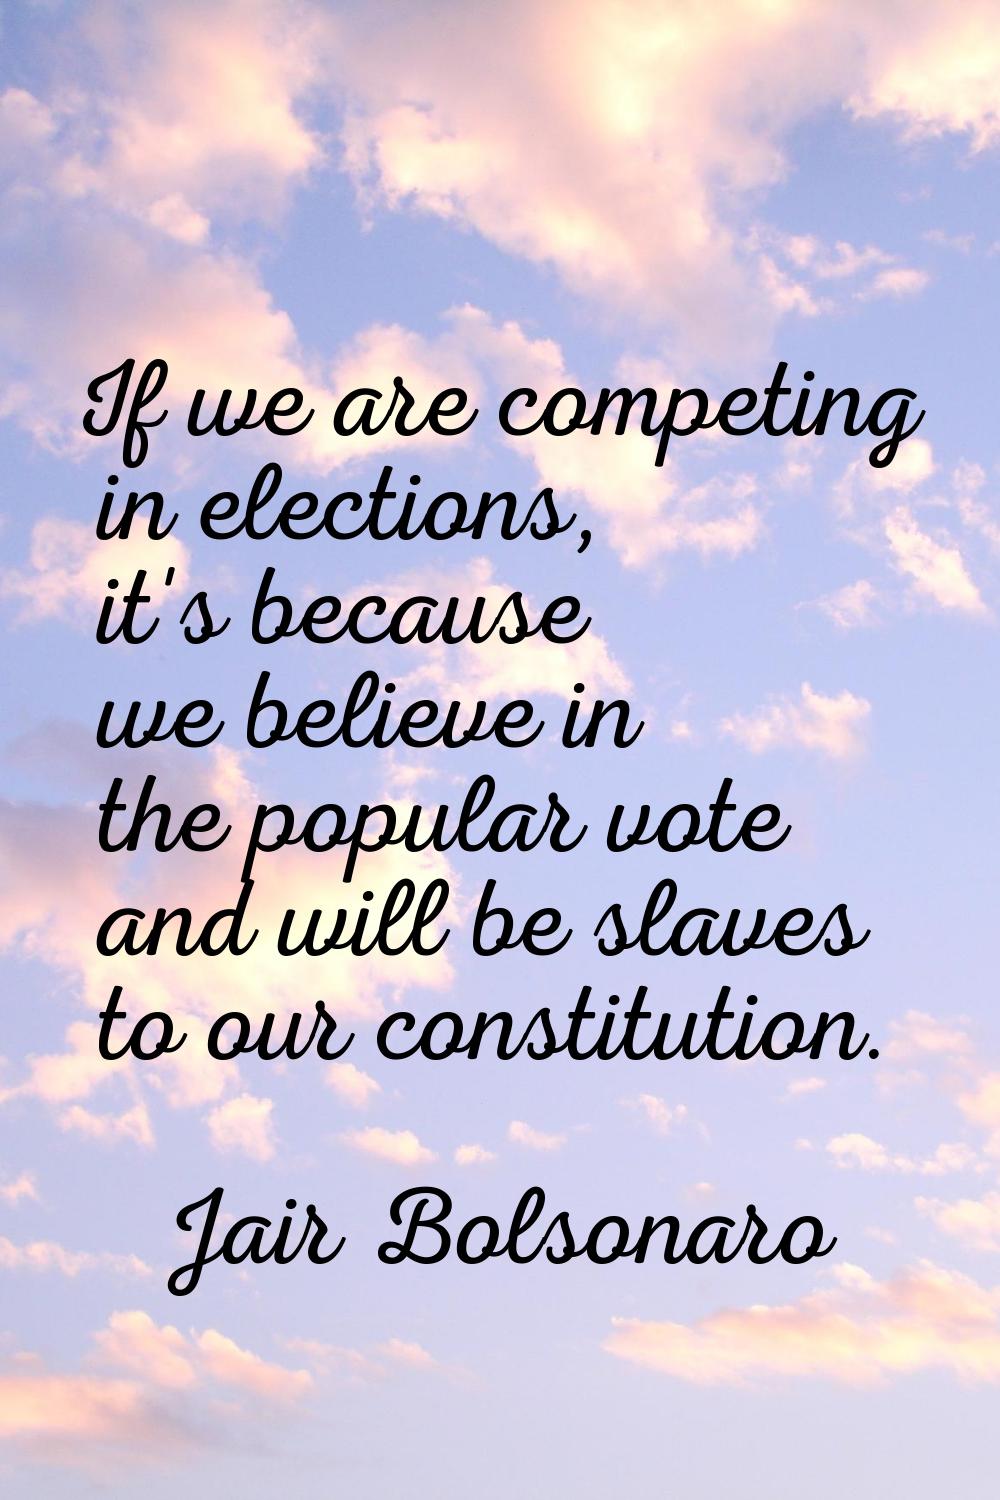 If we are competing in elections, it's because we believe in the popular vote and will be slaves to